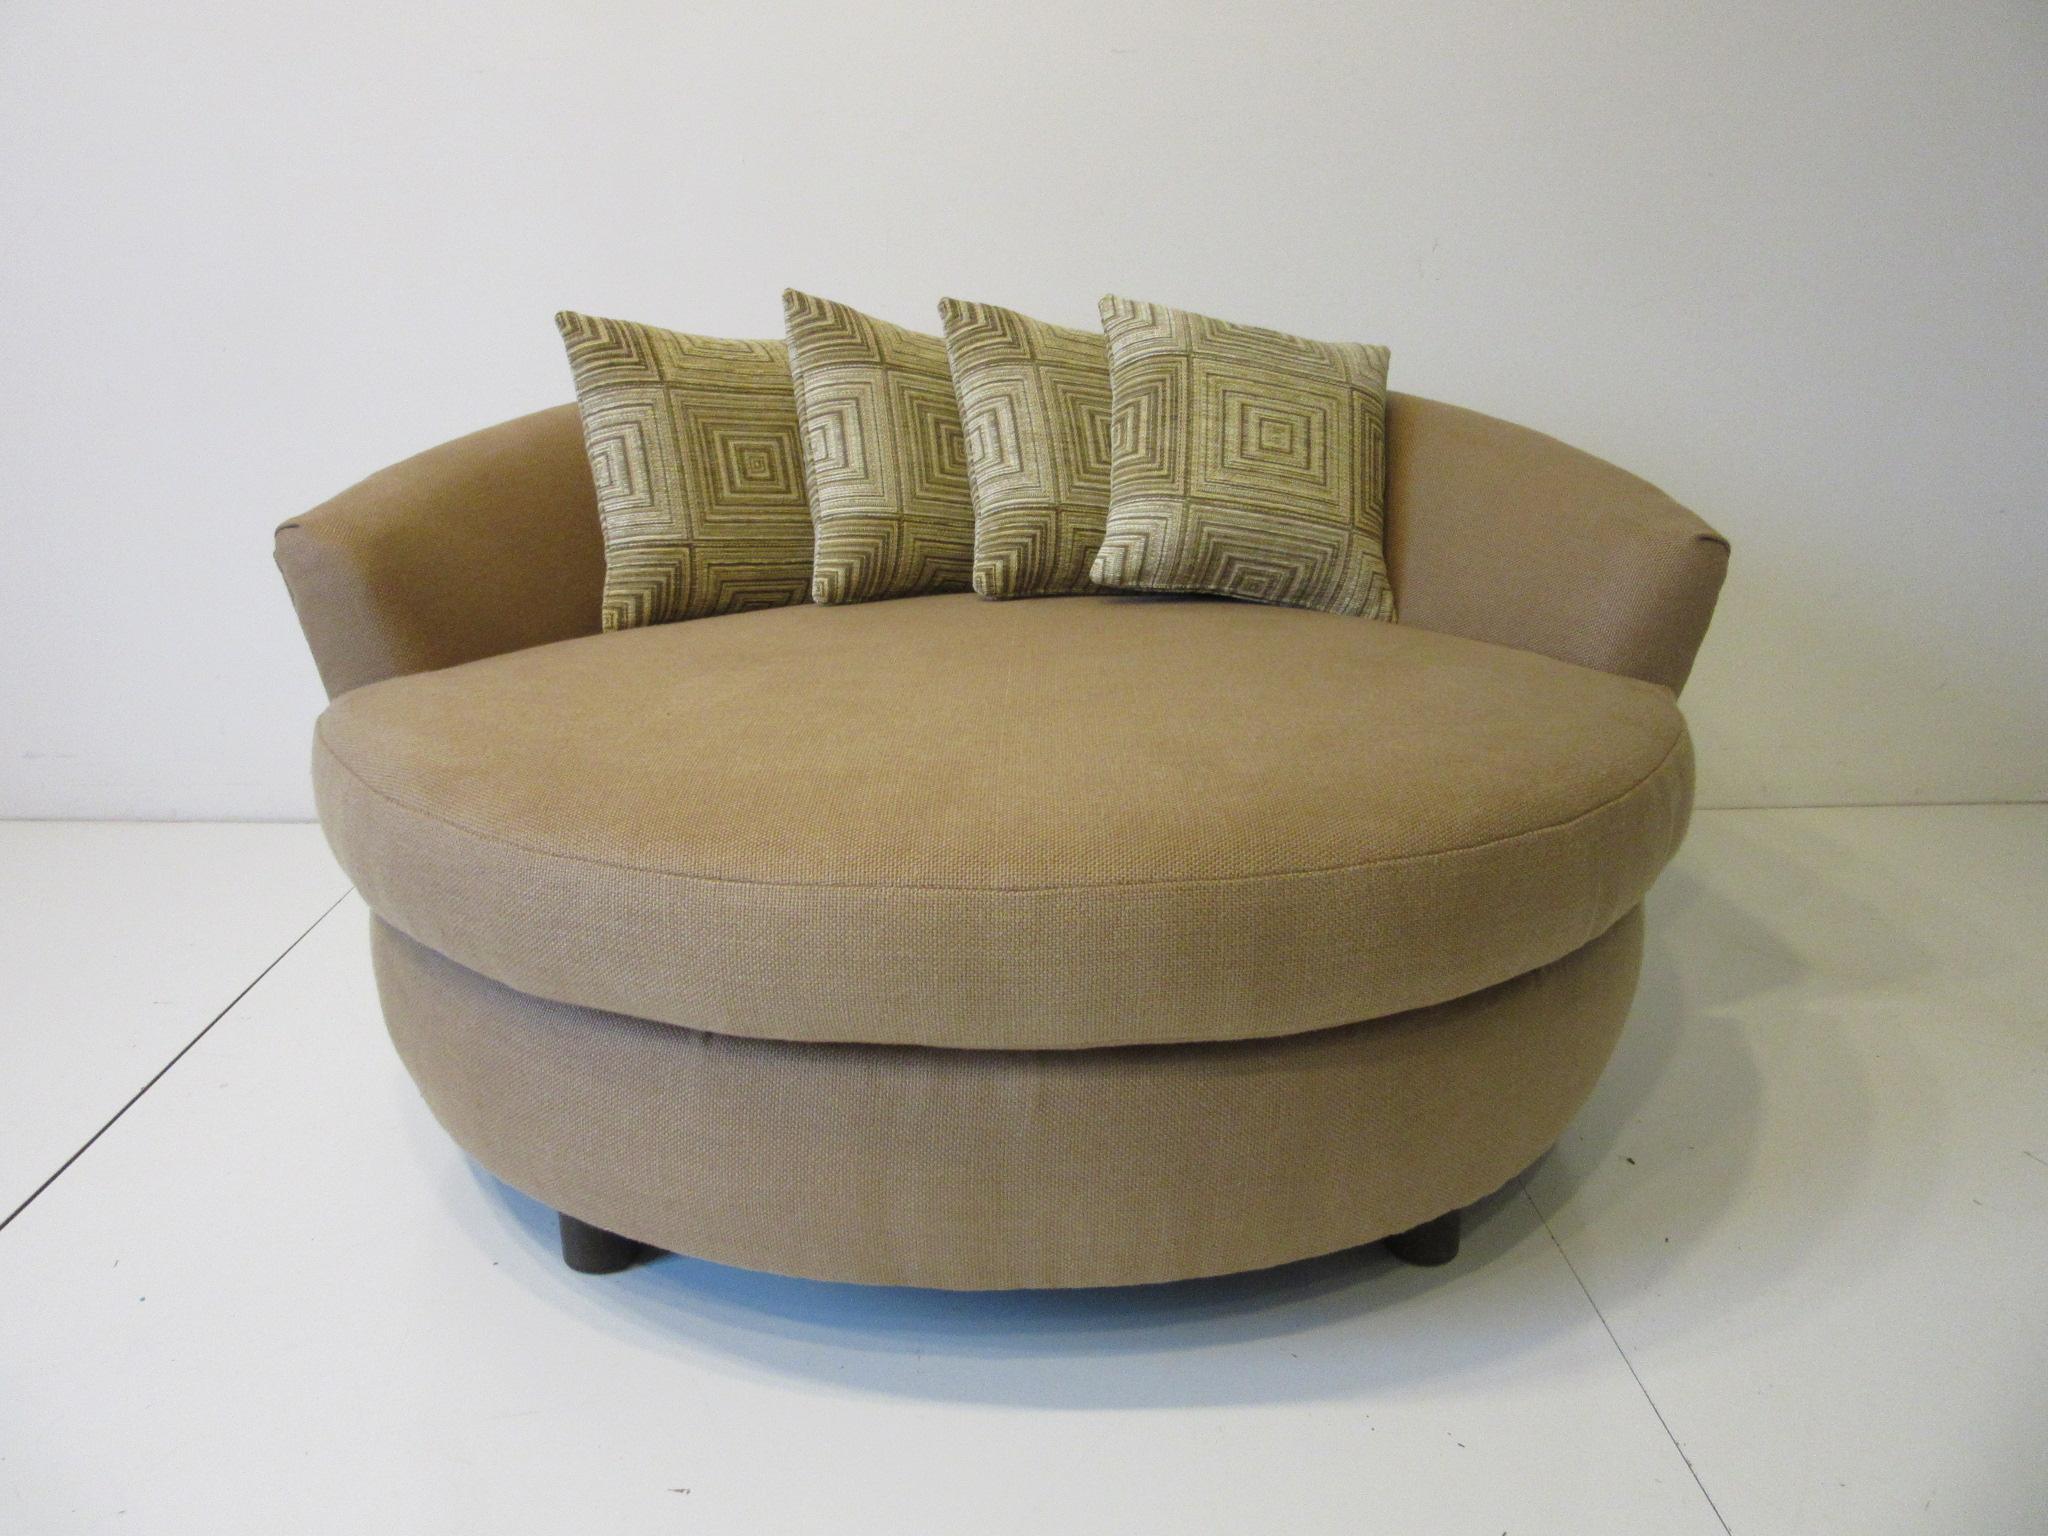 A round upholstered lounger / sofa chair with curved backrest all covered in soft and comfortable Italian linen with four woven fabric throw pillows. Sitting on larger rounded wooden legs making this piece very sturdy and useful for your living